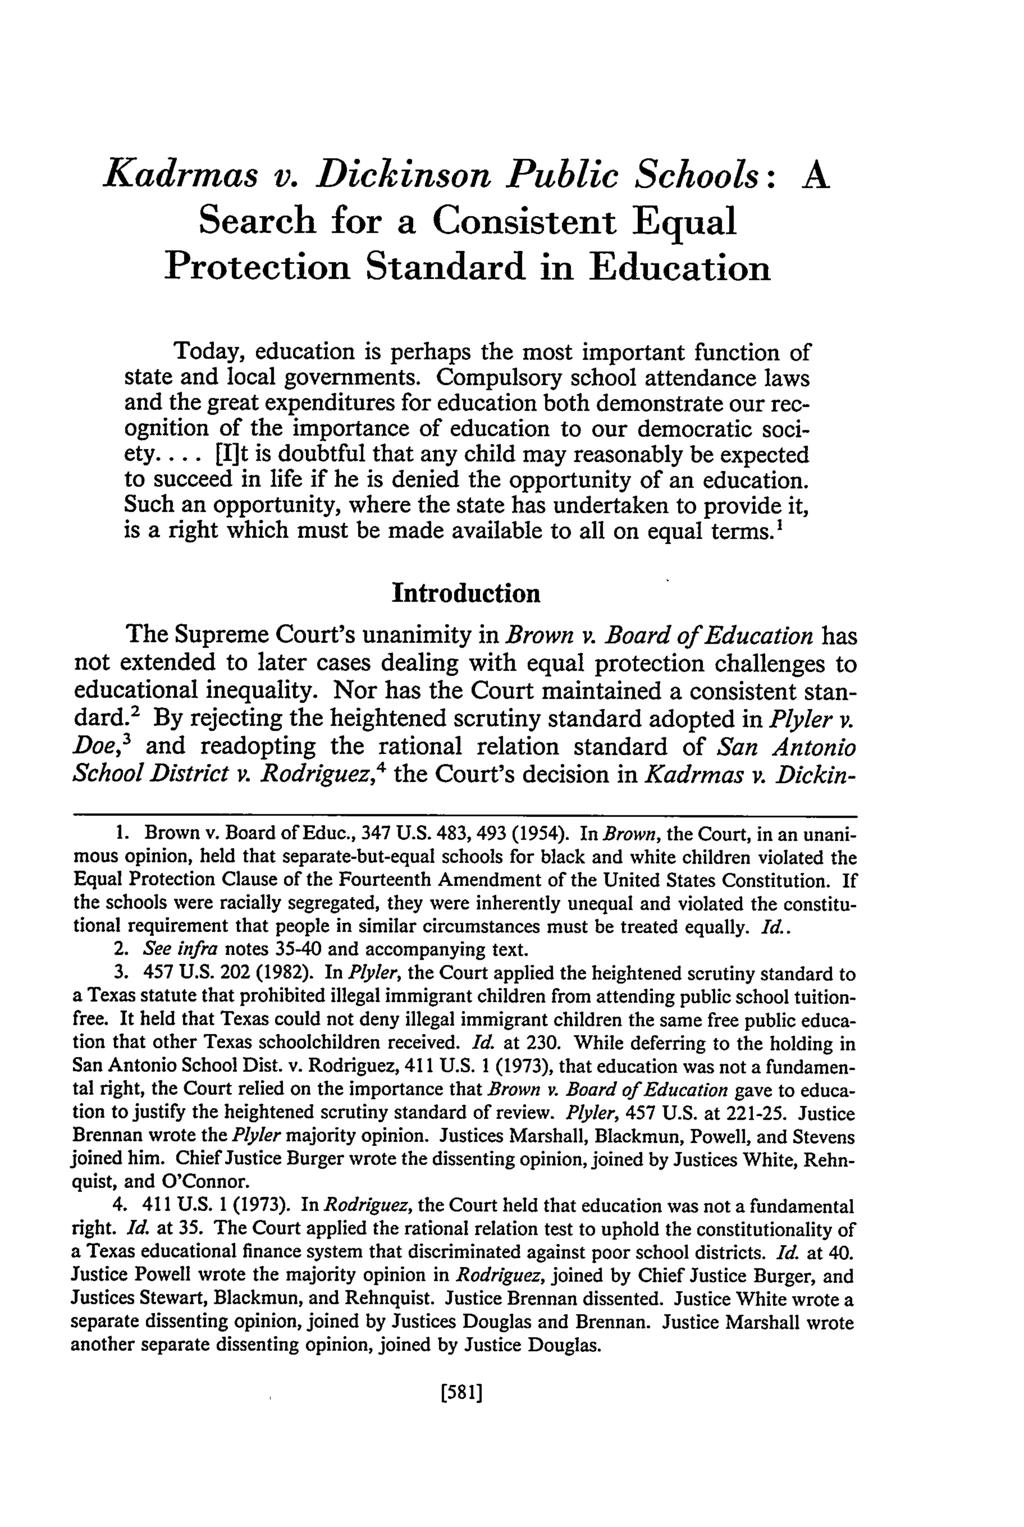 Kadrmas v. Dickinson Public Schools: A Search for a Consistent Equal Protection Standard in Education Today, education is perhaps the most important function of state and local governments.